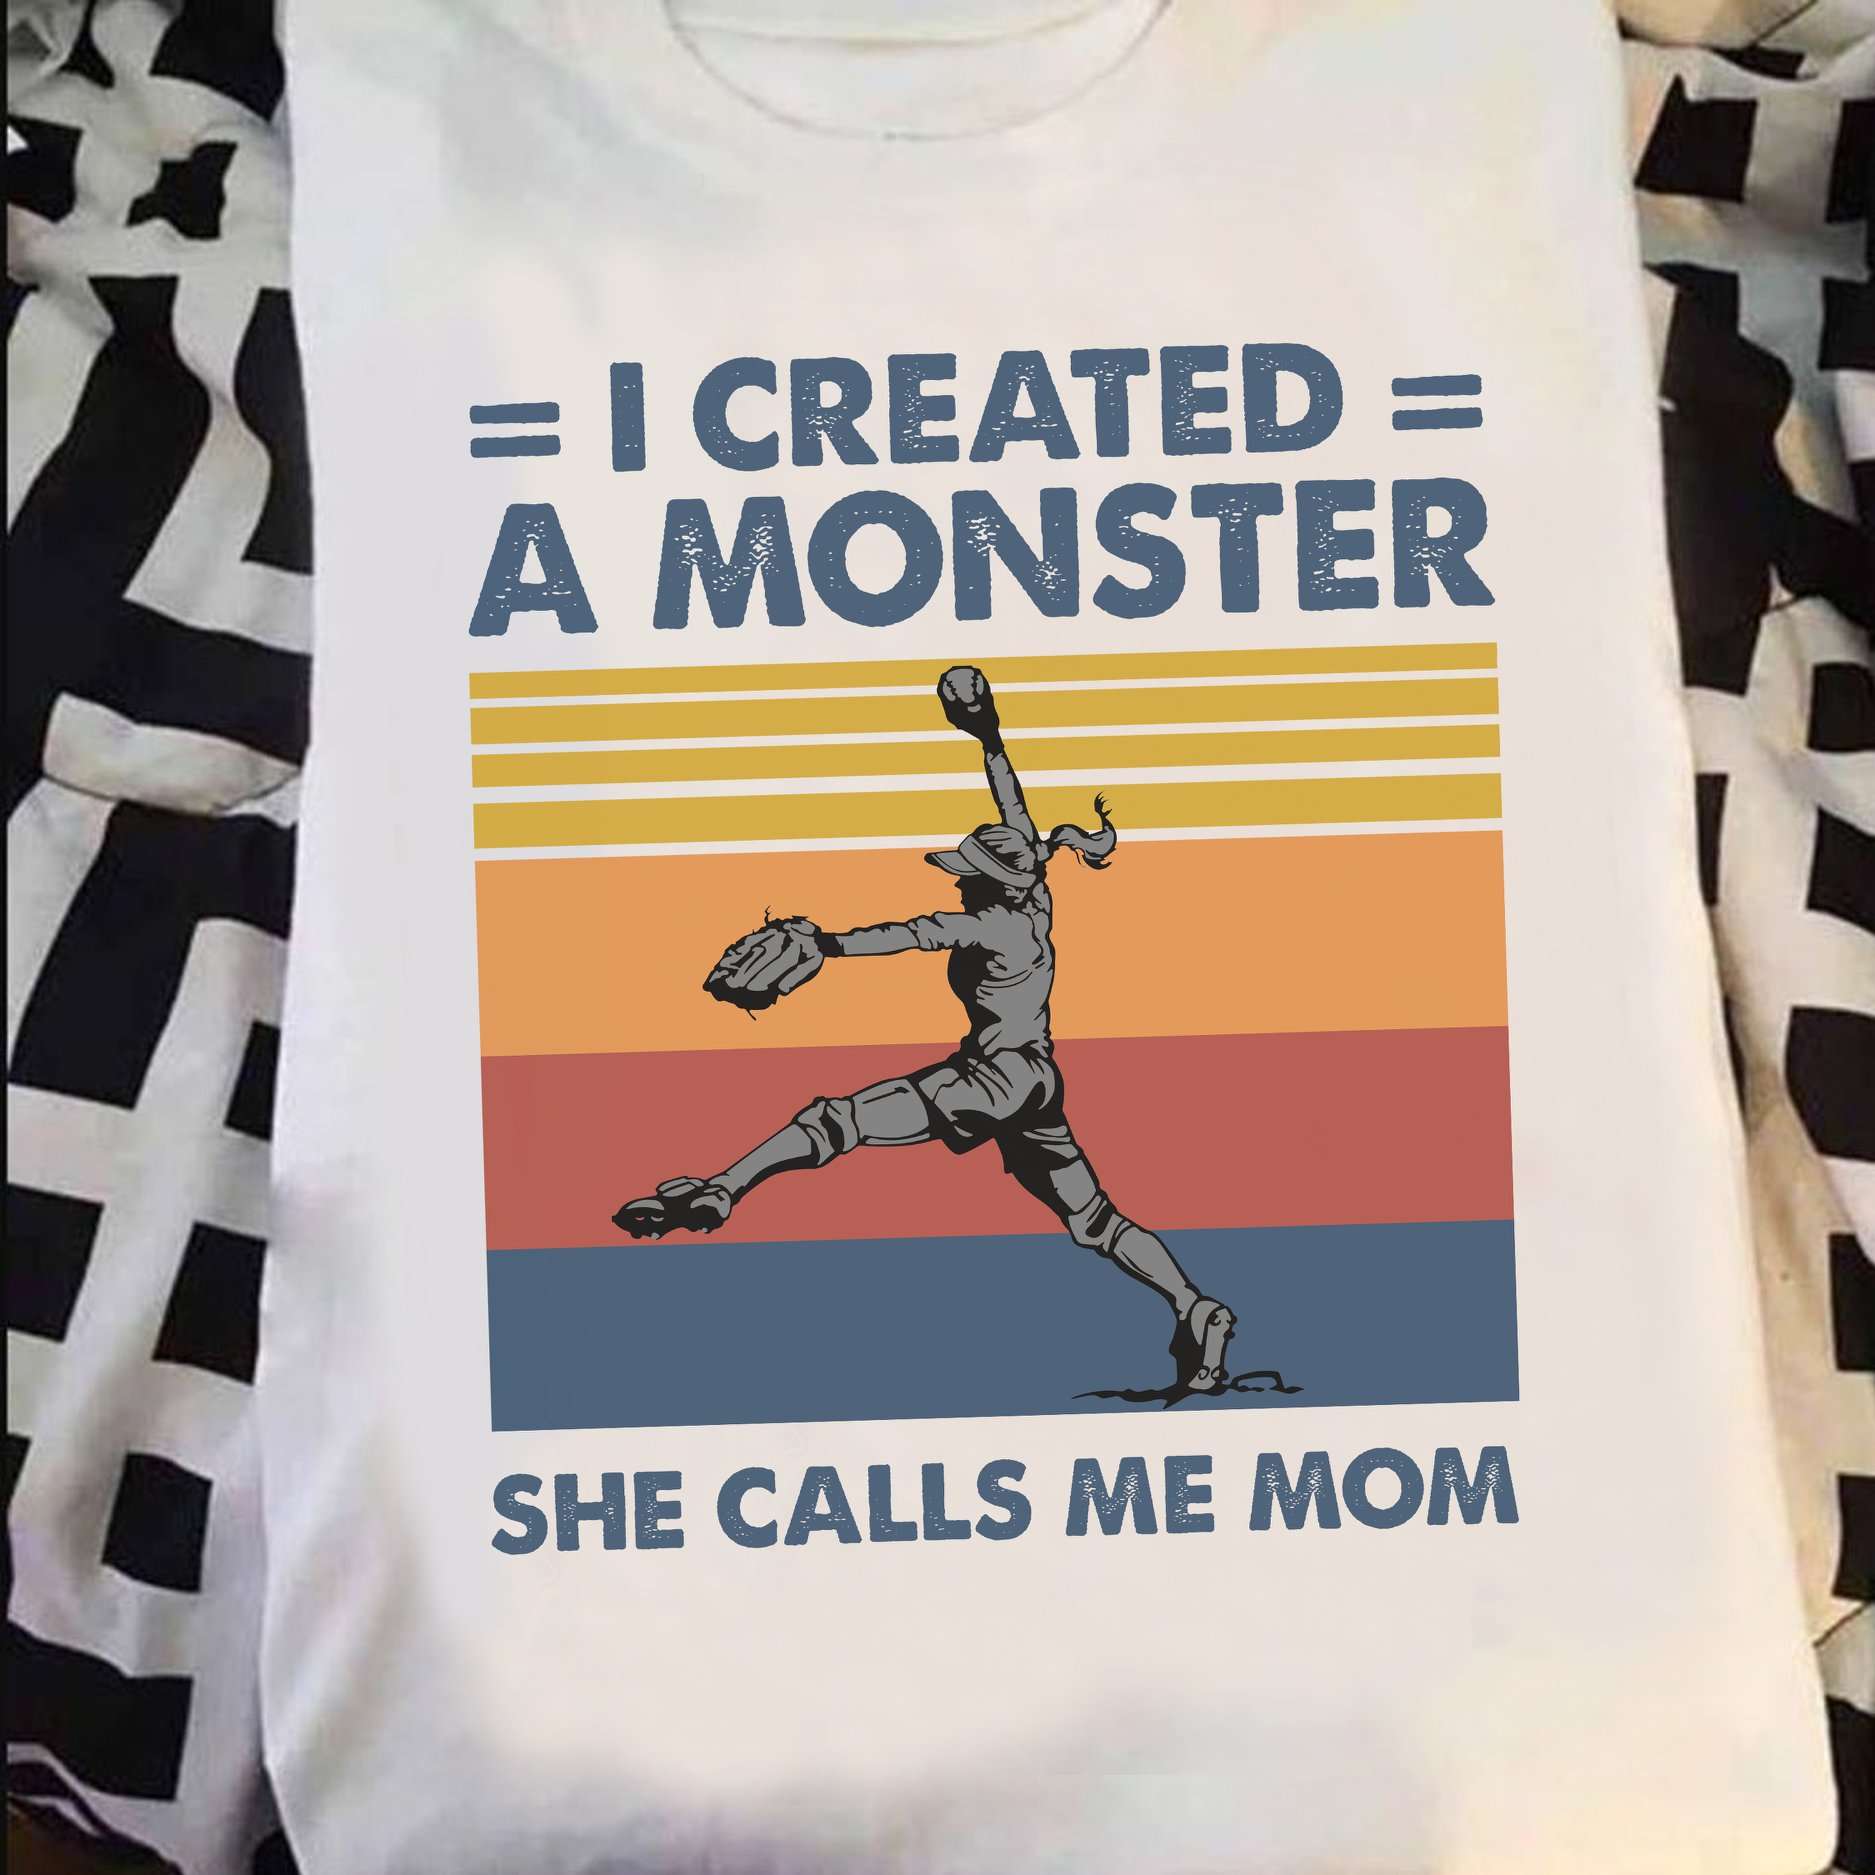 I created a monster she calls me mom - Baseball monster, daughter and mother